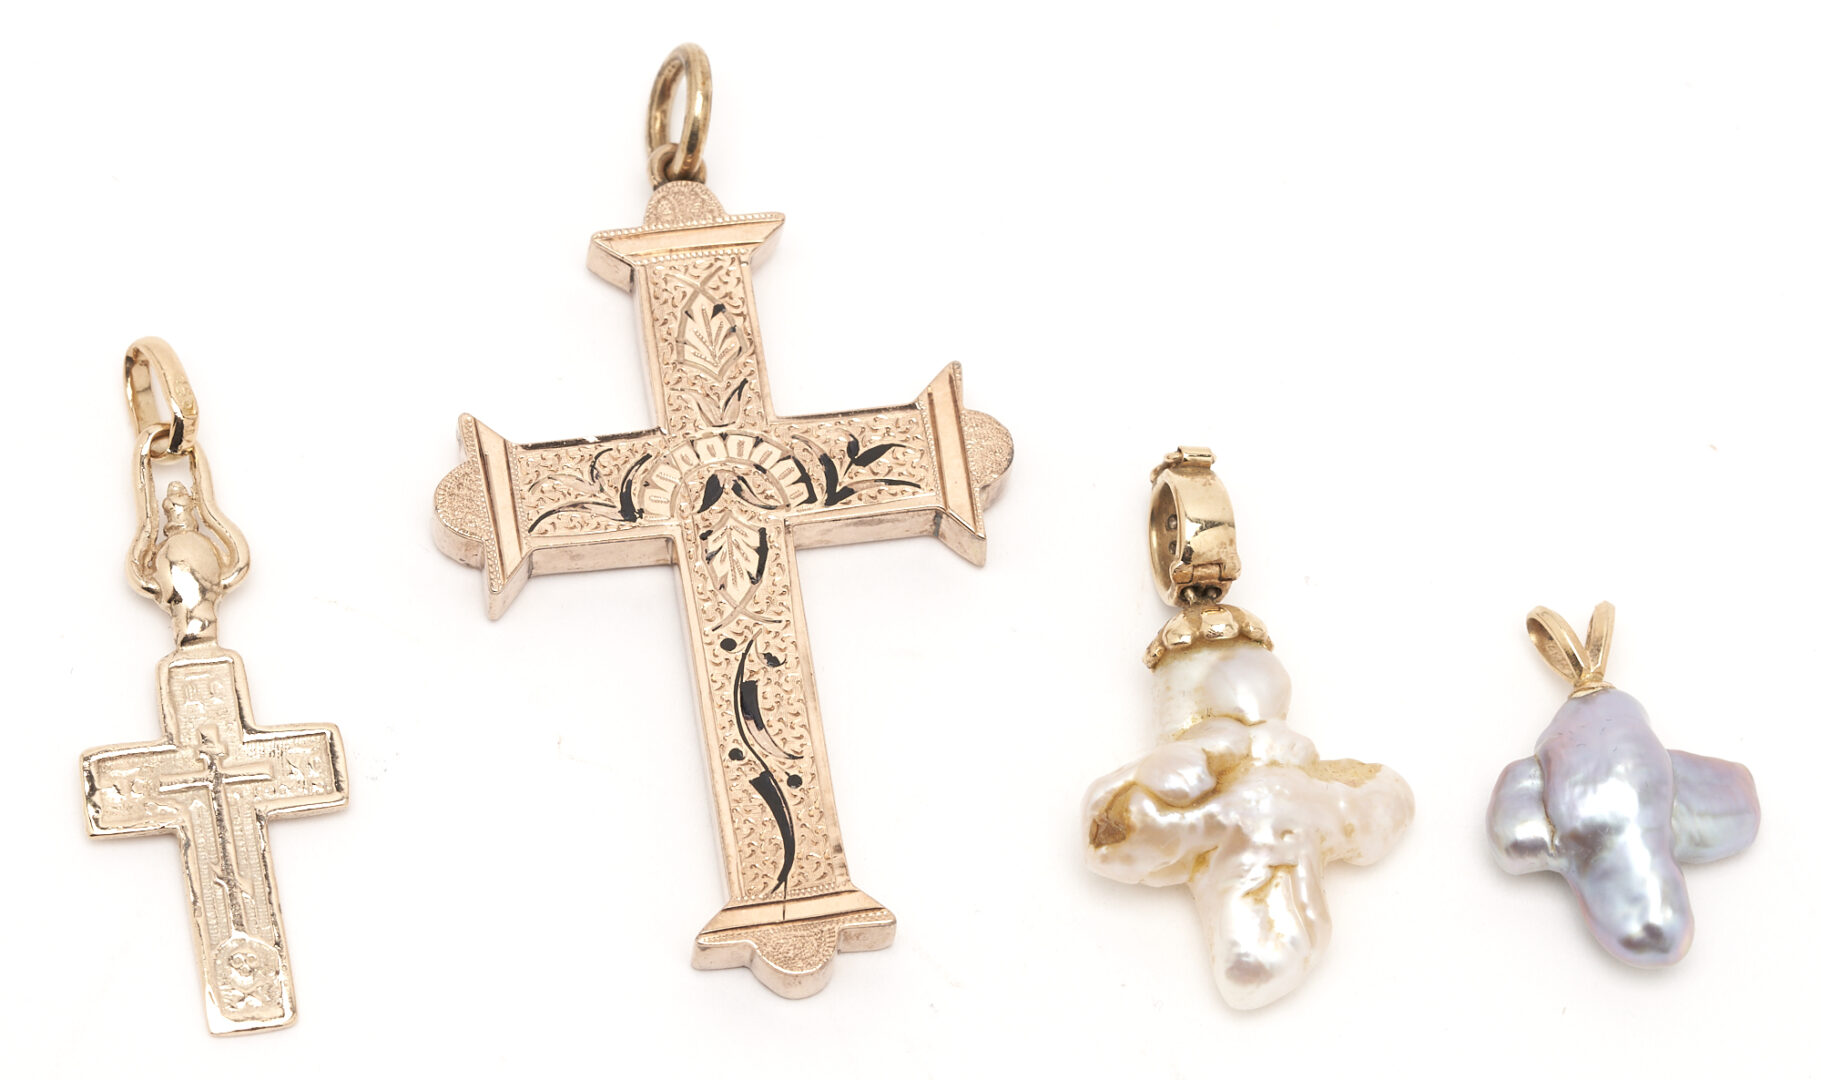 Lot 771: Assembled Grouping of Gold Religious Cross Pendants, 7 total